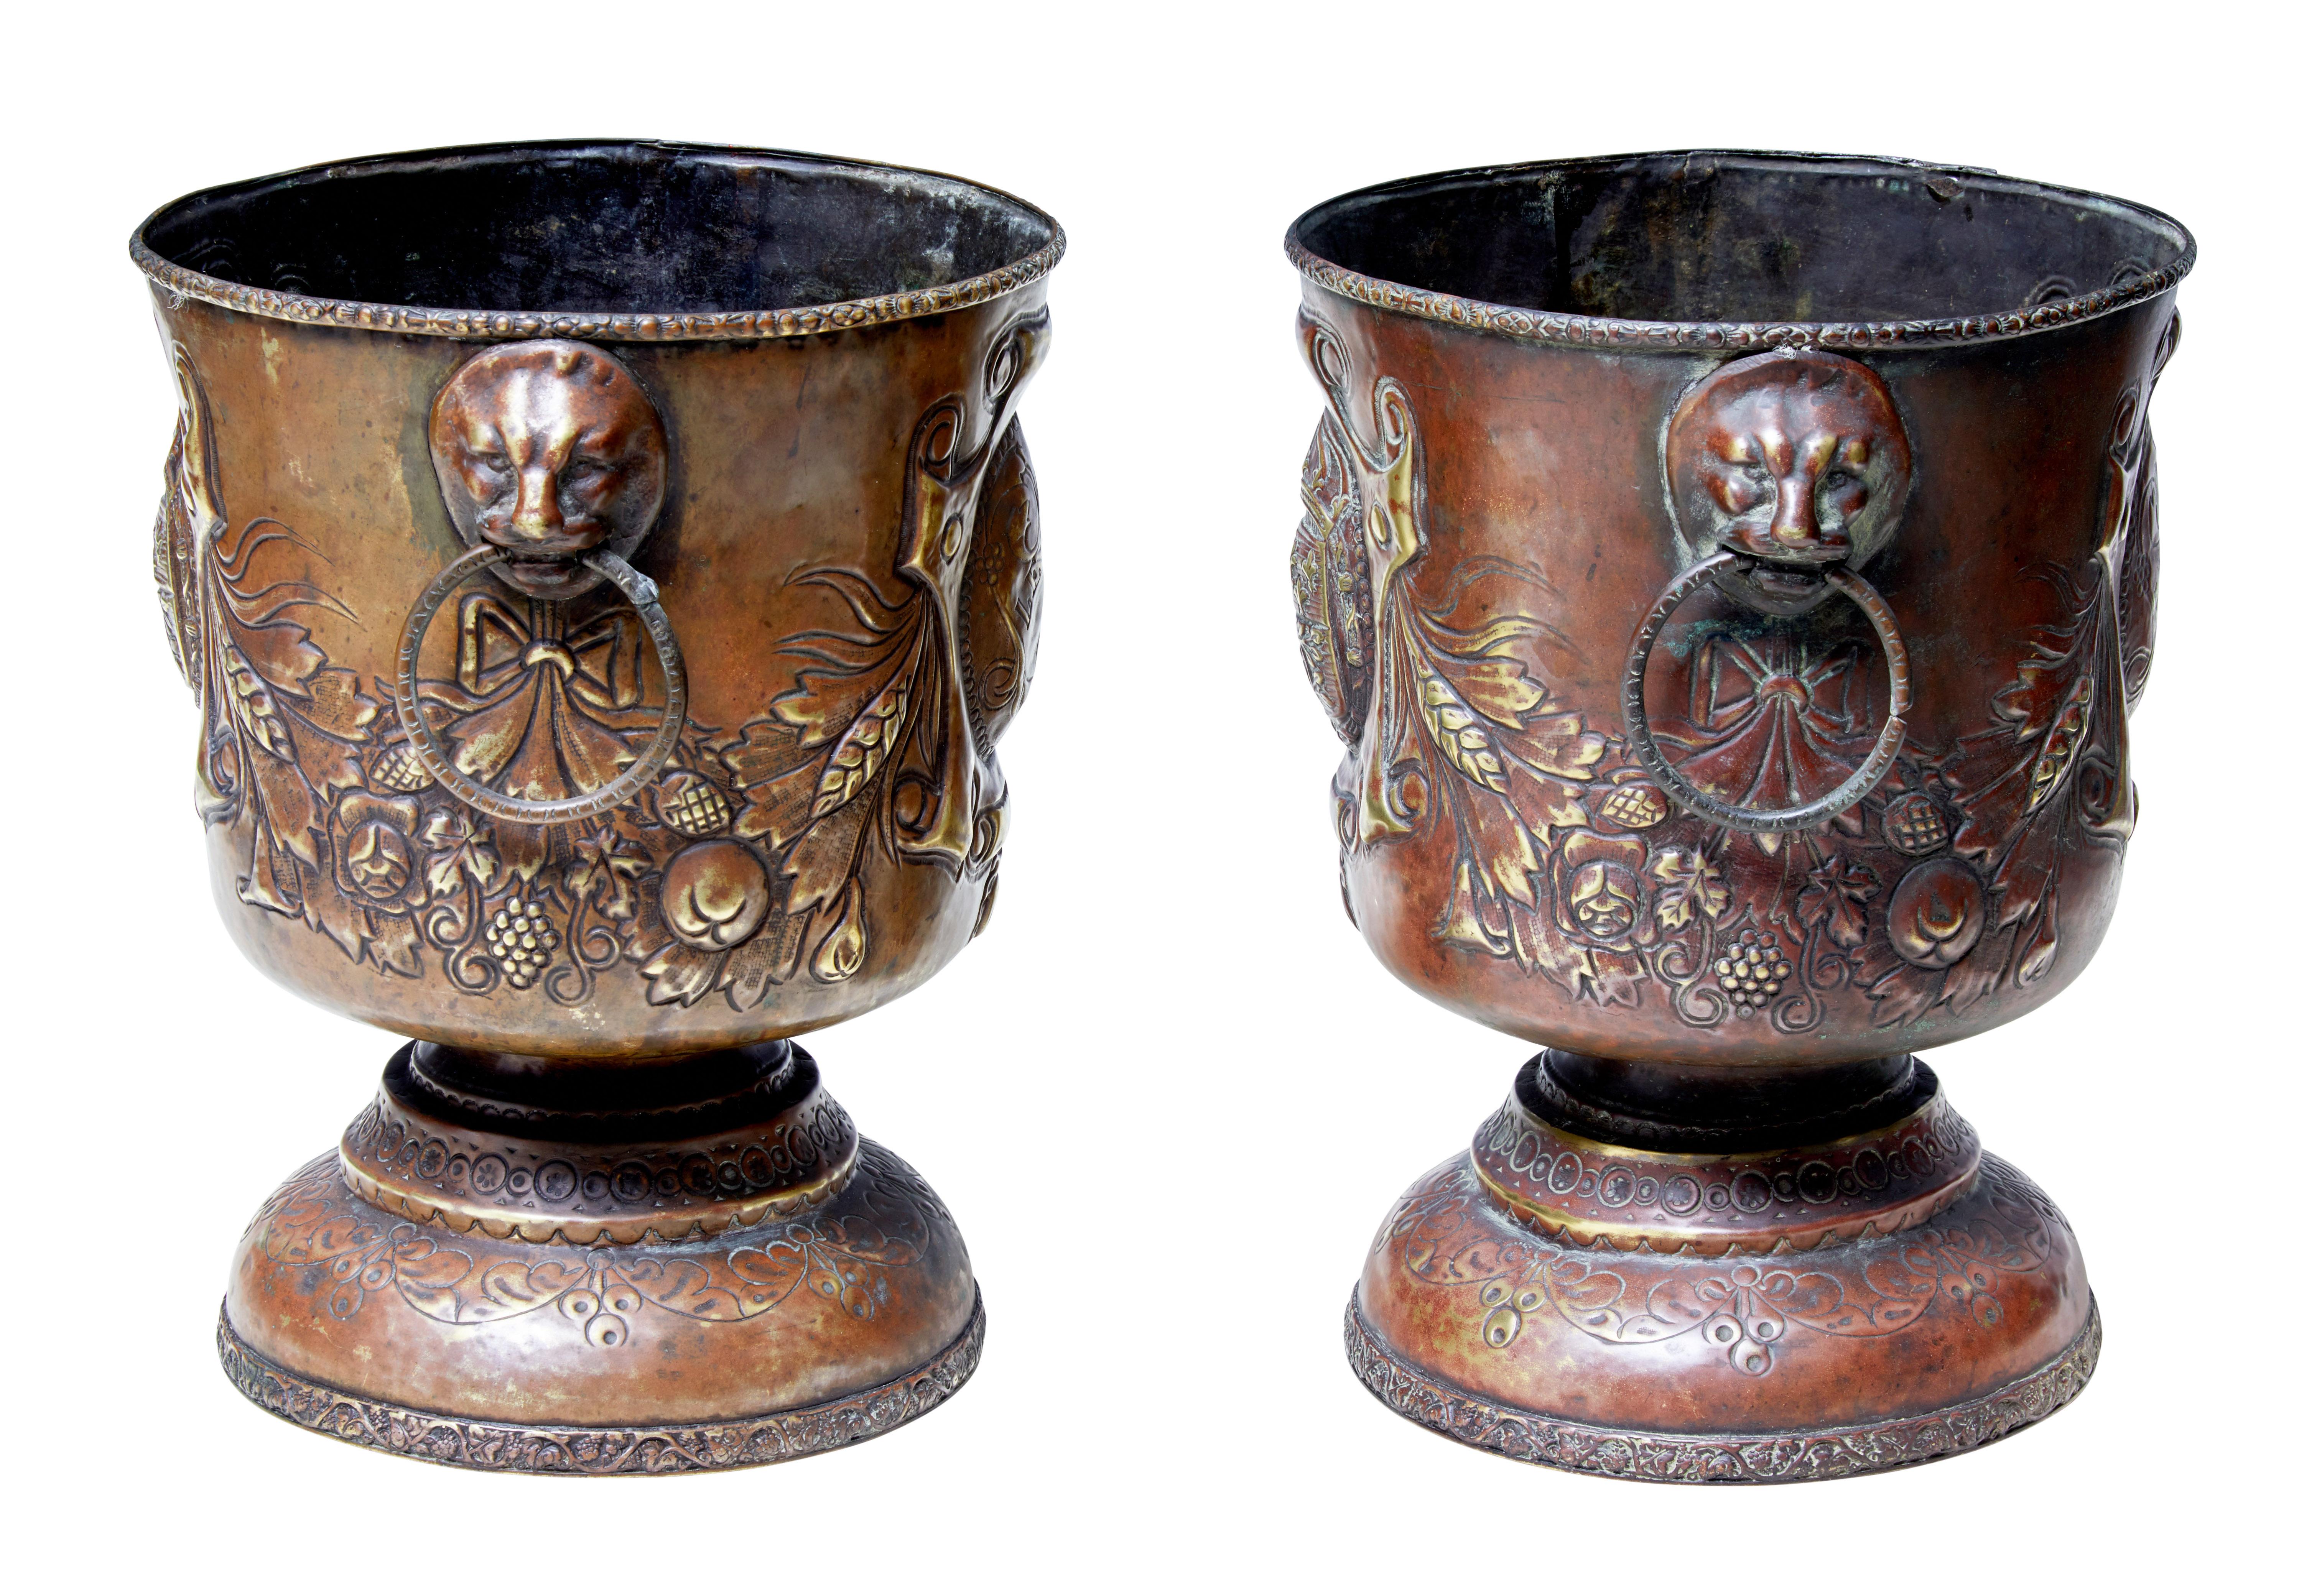 Rococo Revival Pair of Late 19th Century Repousse Copper Wine Coolers